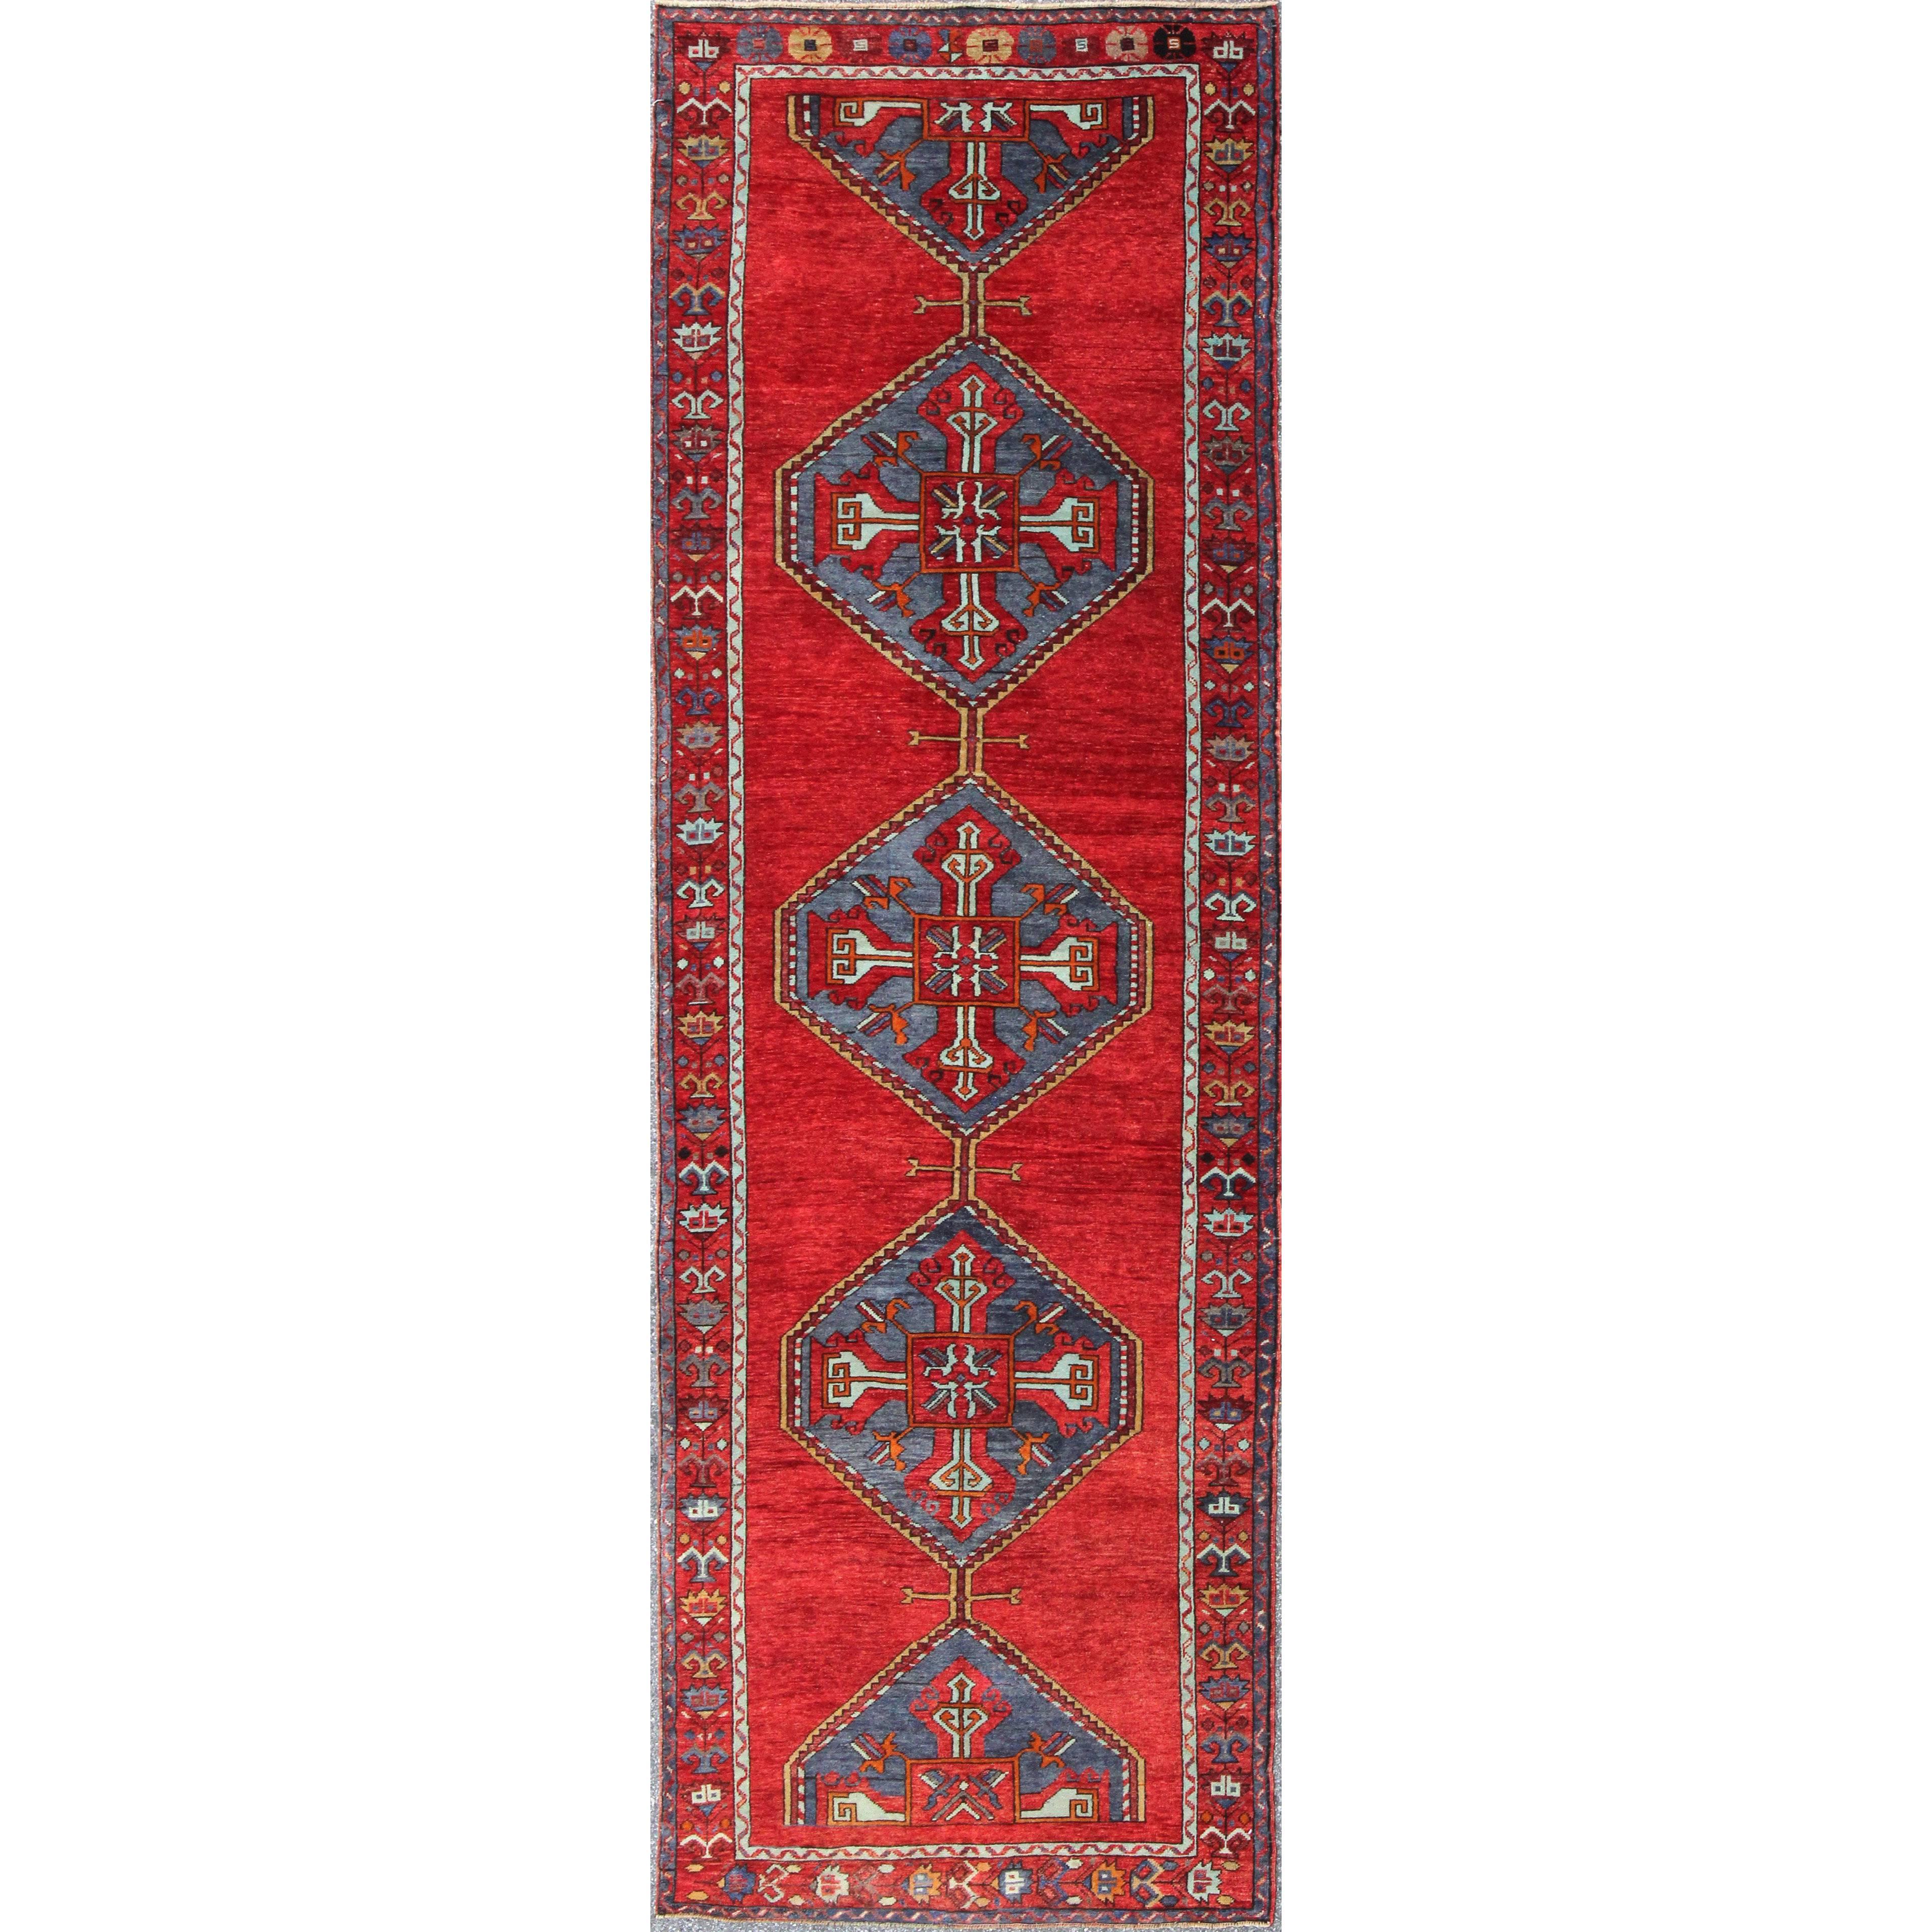 Colorful Turkish Oushak Runner in Various Shades of Red, Blue, and Yellow